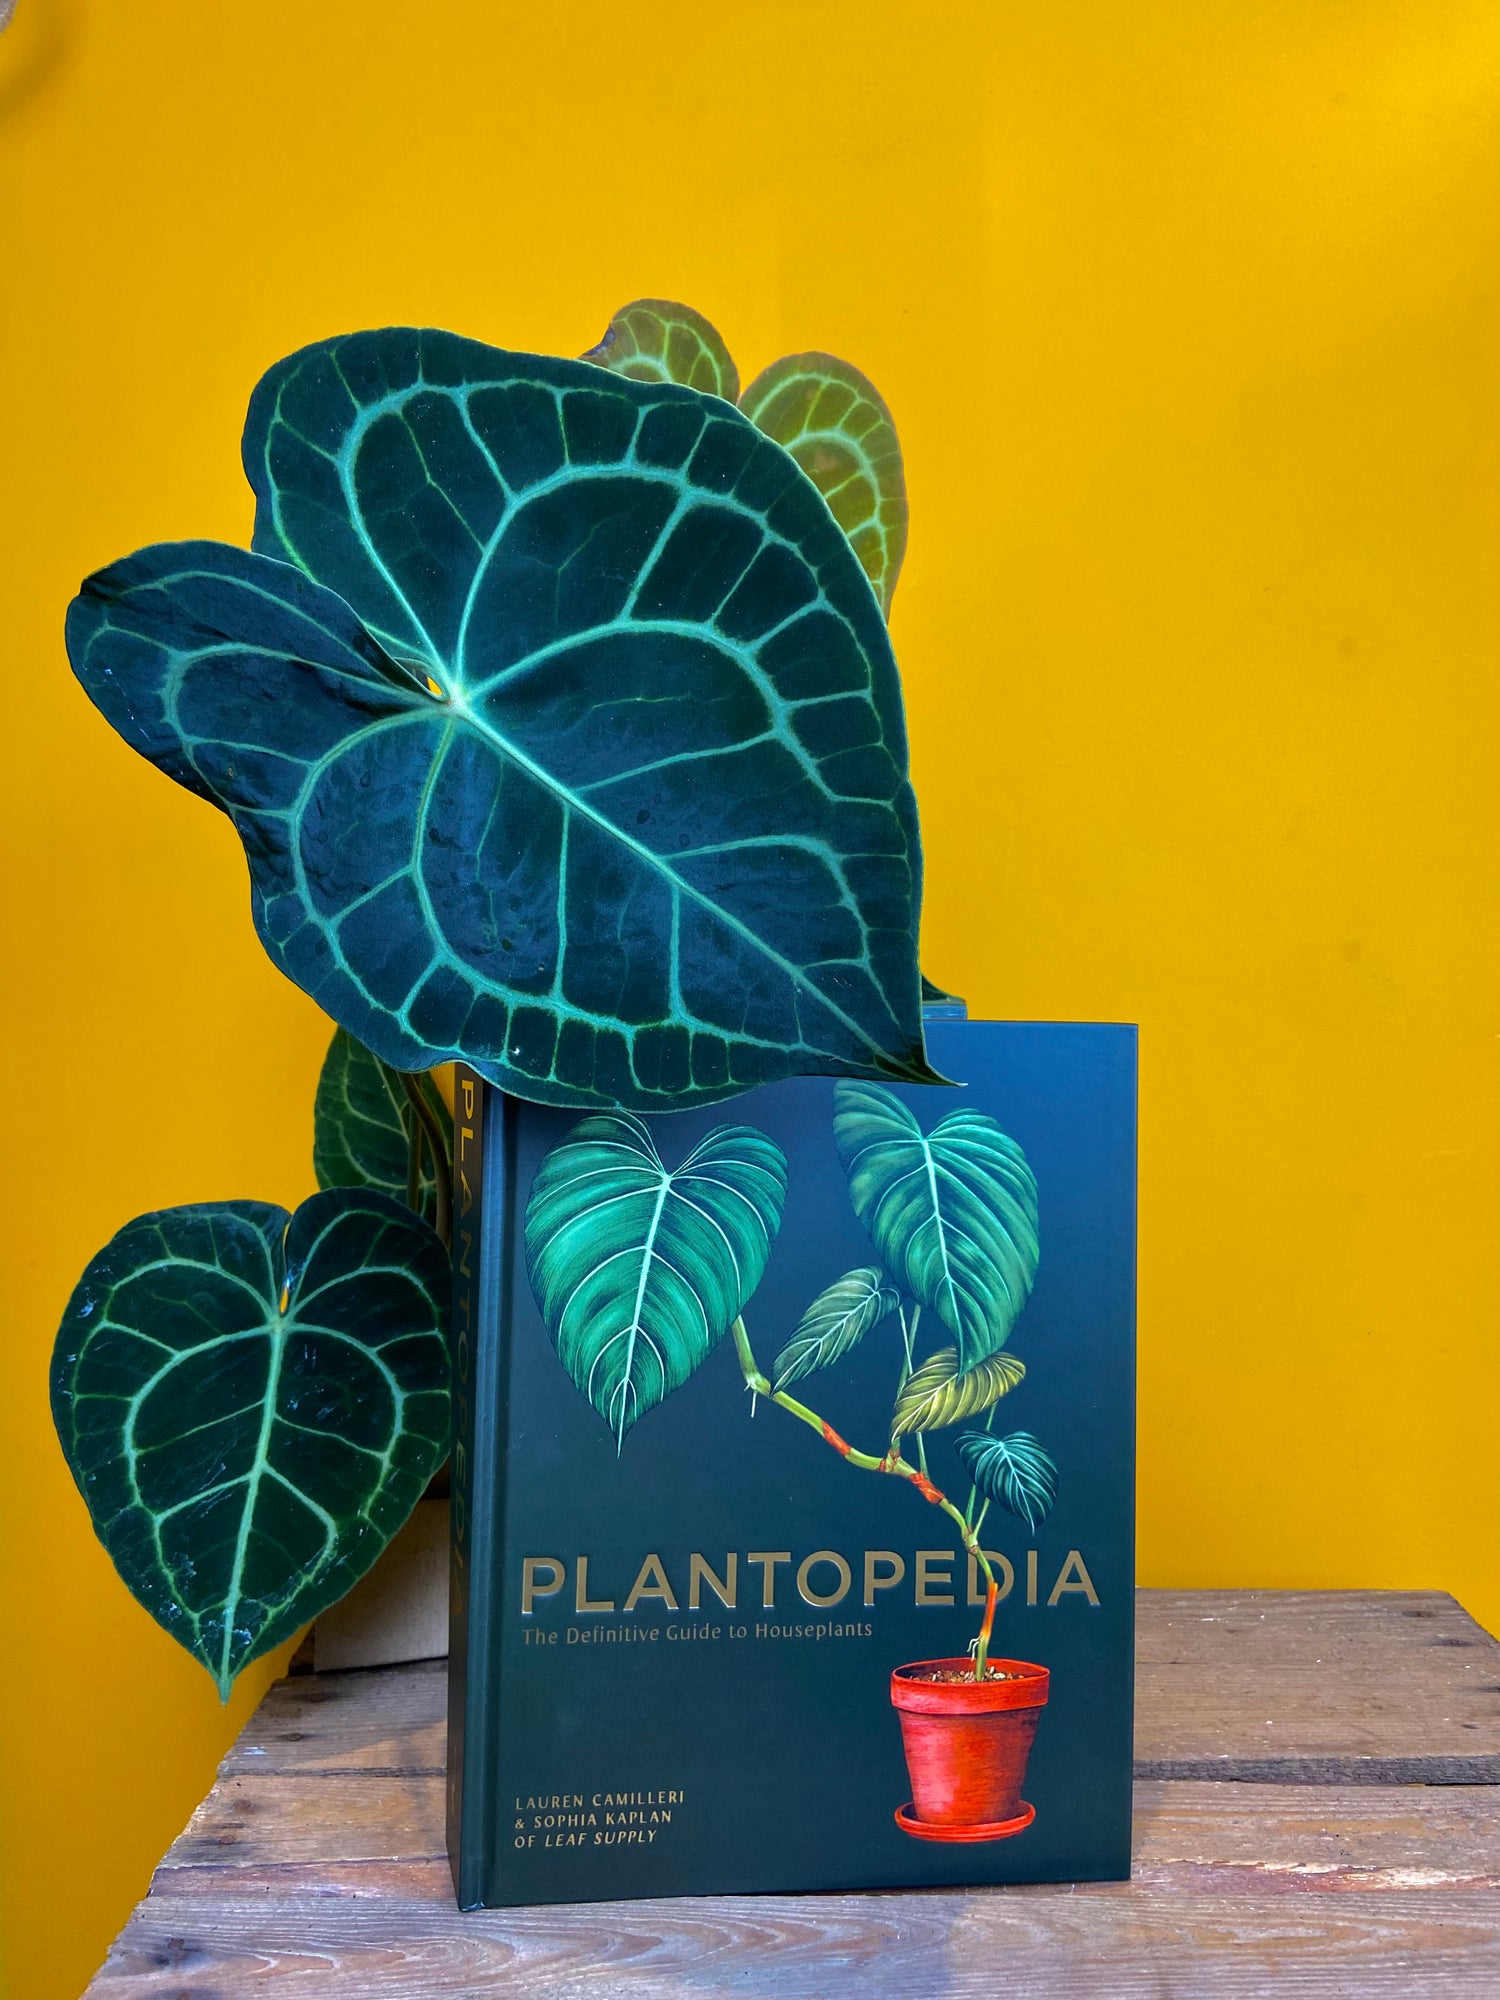 A Plantopedia book by Lauren Camilleri and Sophia Kaplan from Leaf Supply 